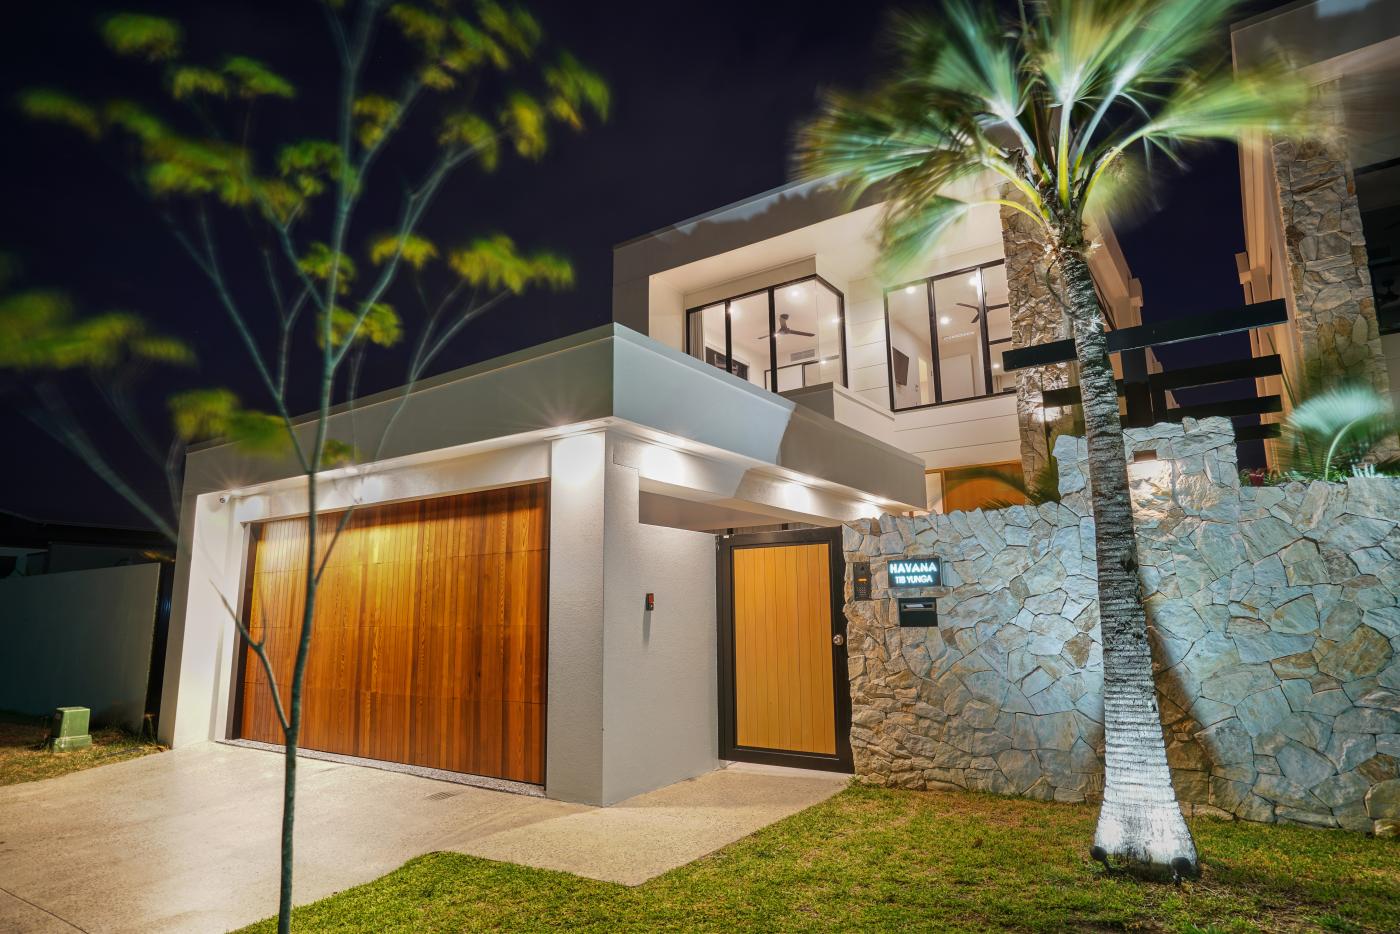 M-Motion Real Estate Agency, 11A Yunga Court Broadbeach Waters, QLD, 4218, Michael Mahon, Lauren Mahon, Best Real Estate Agent Gold Coast